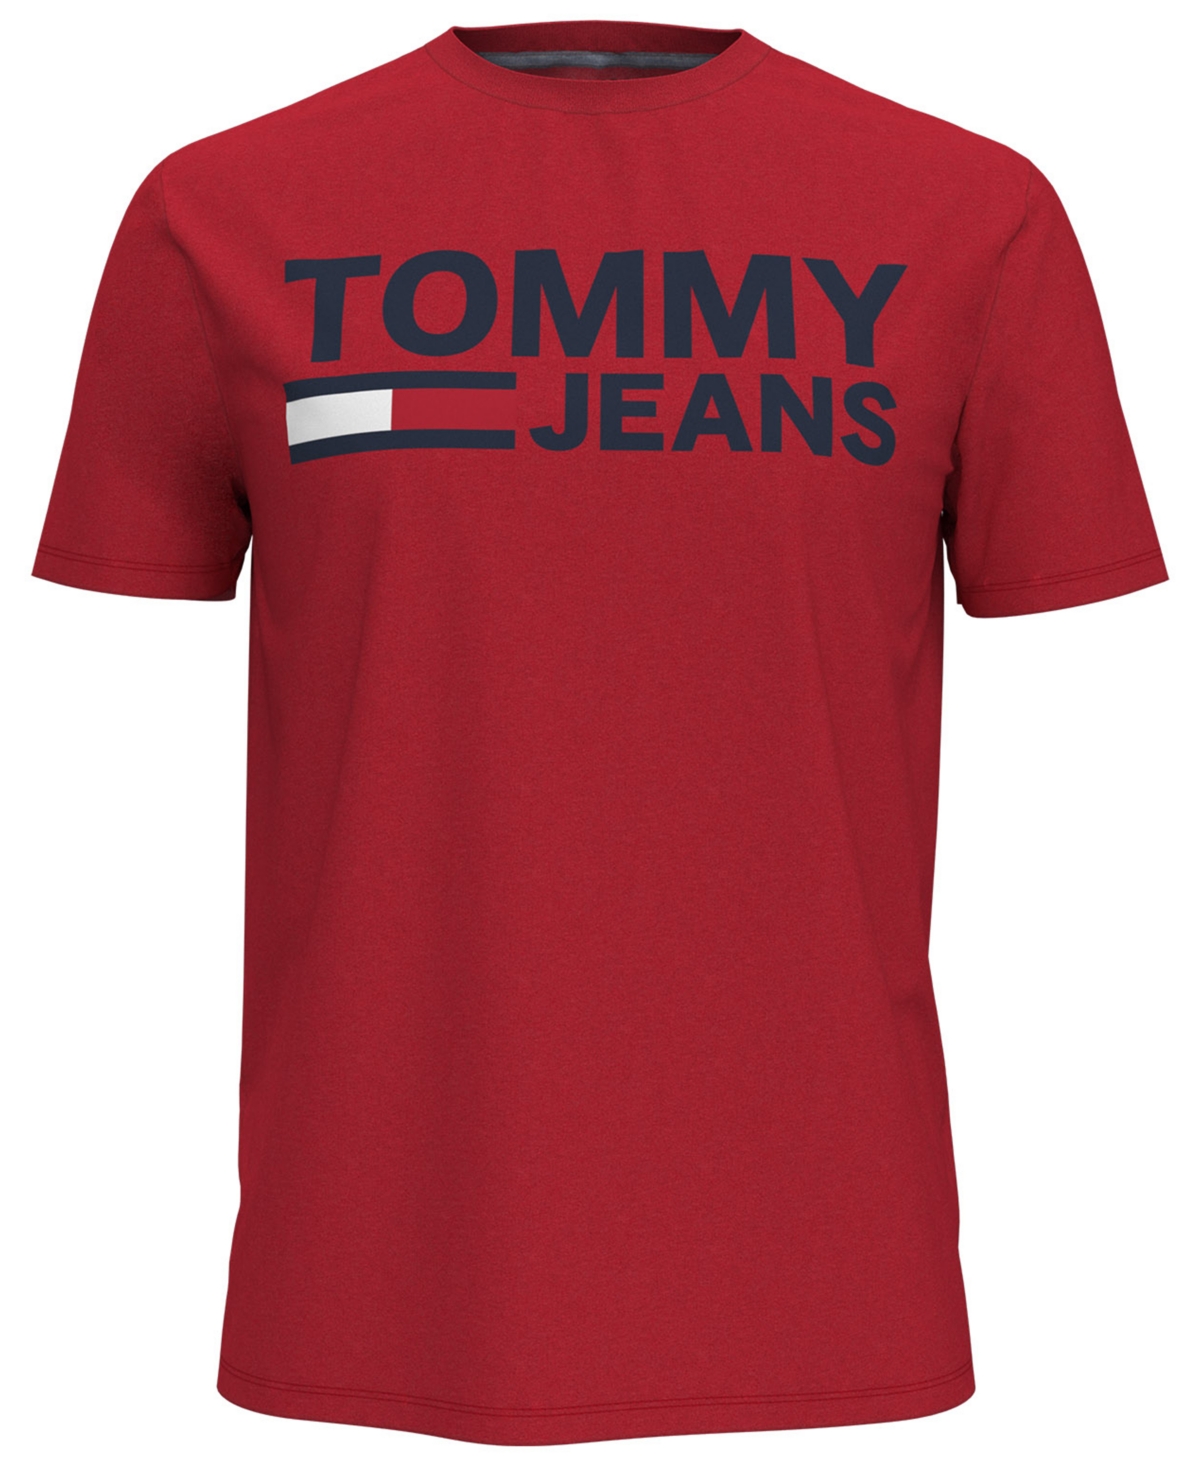 TOMMY HILFIGER MEN'S TOMMY JEANS LOCK UP LOGO GRAPHIC T-SHIRT